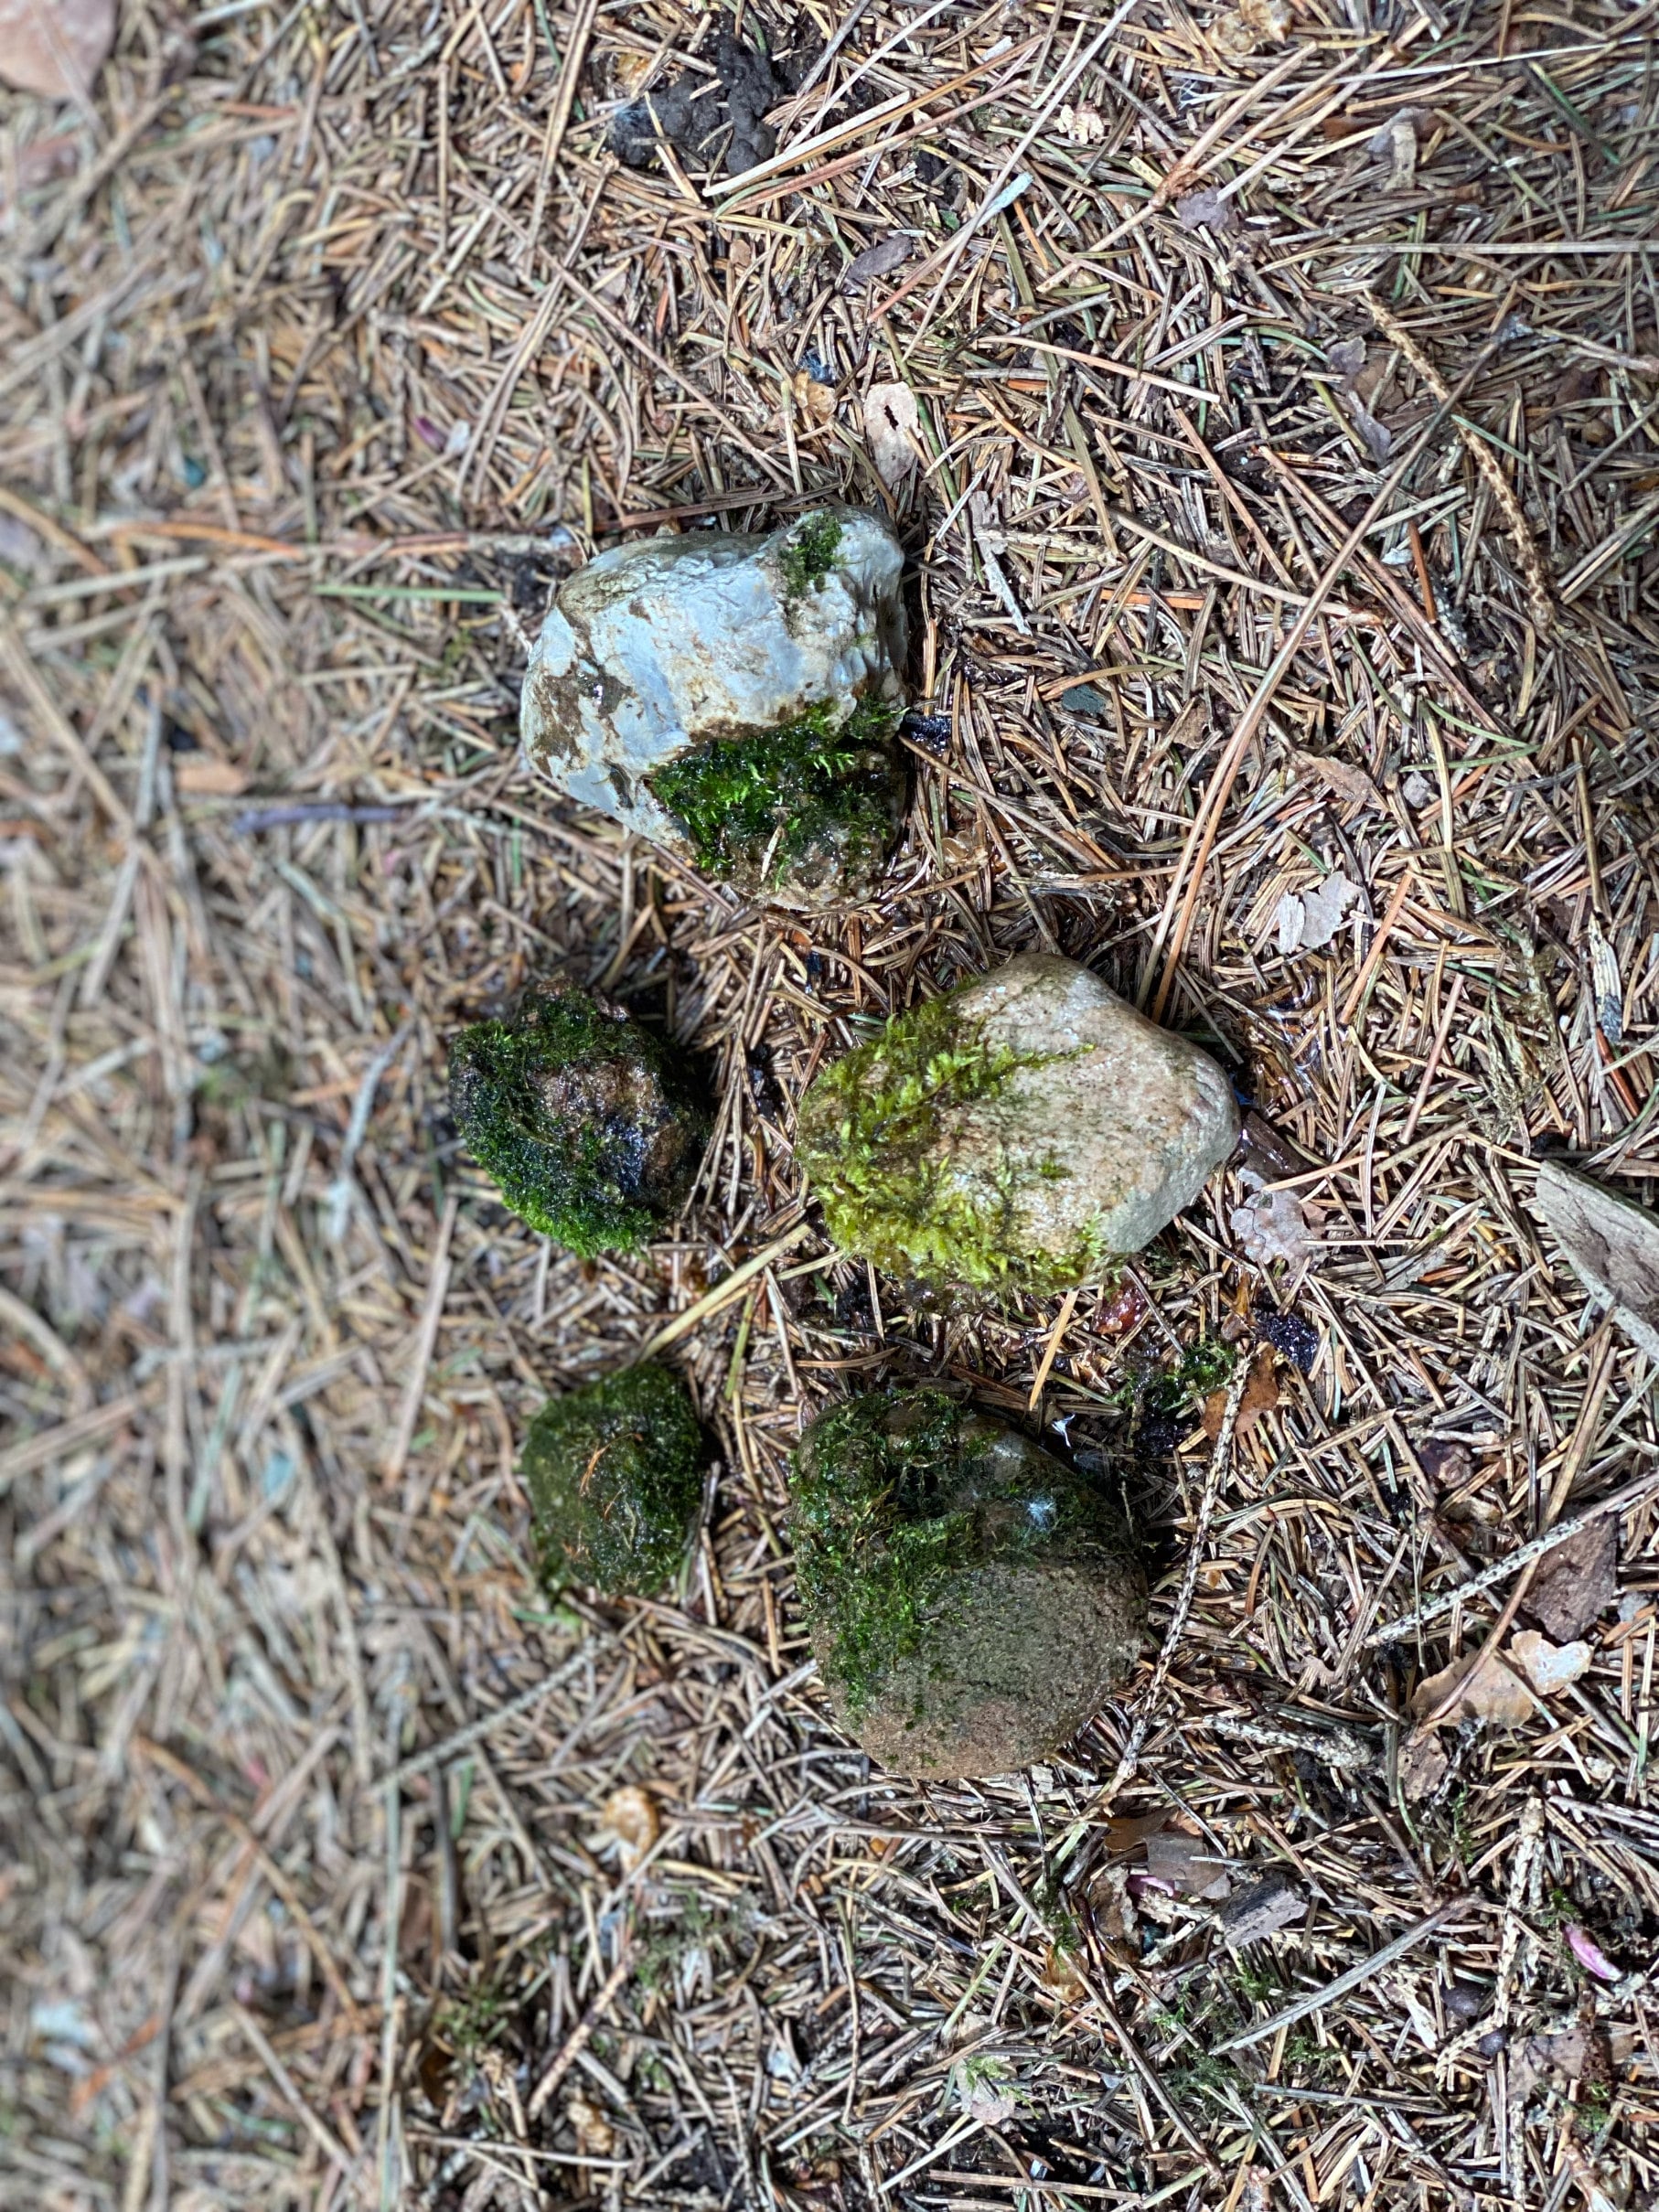 Five Live Moss Covered Stones, Mossy Rocks, About 1-2 Inches in Size